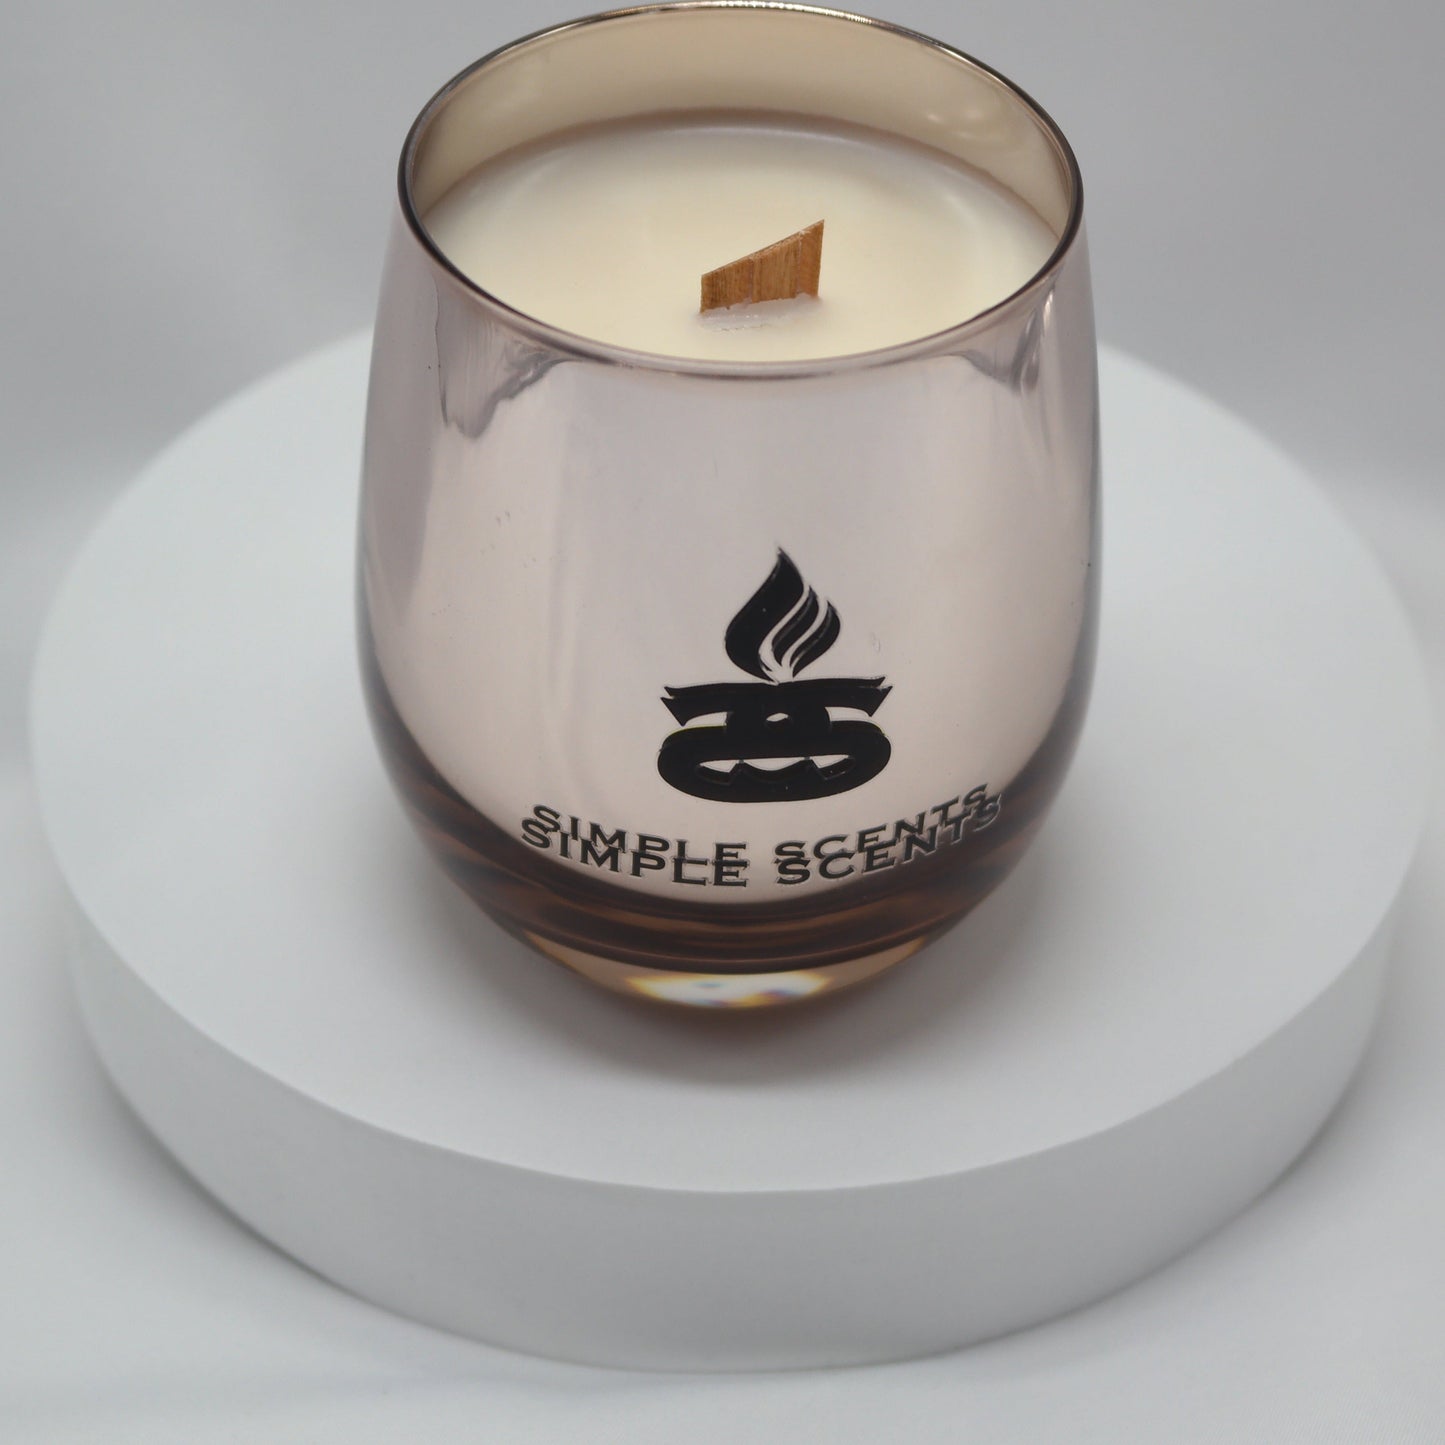 Selene - Simple Scents Luxe Rosé Noir Wooden Wick Soy Candle